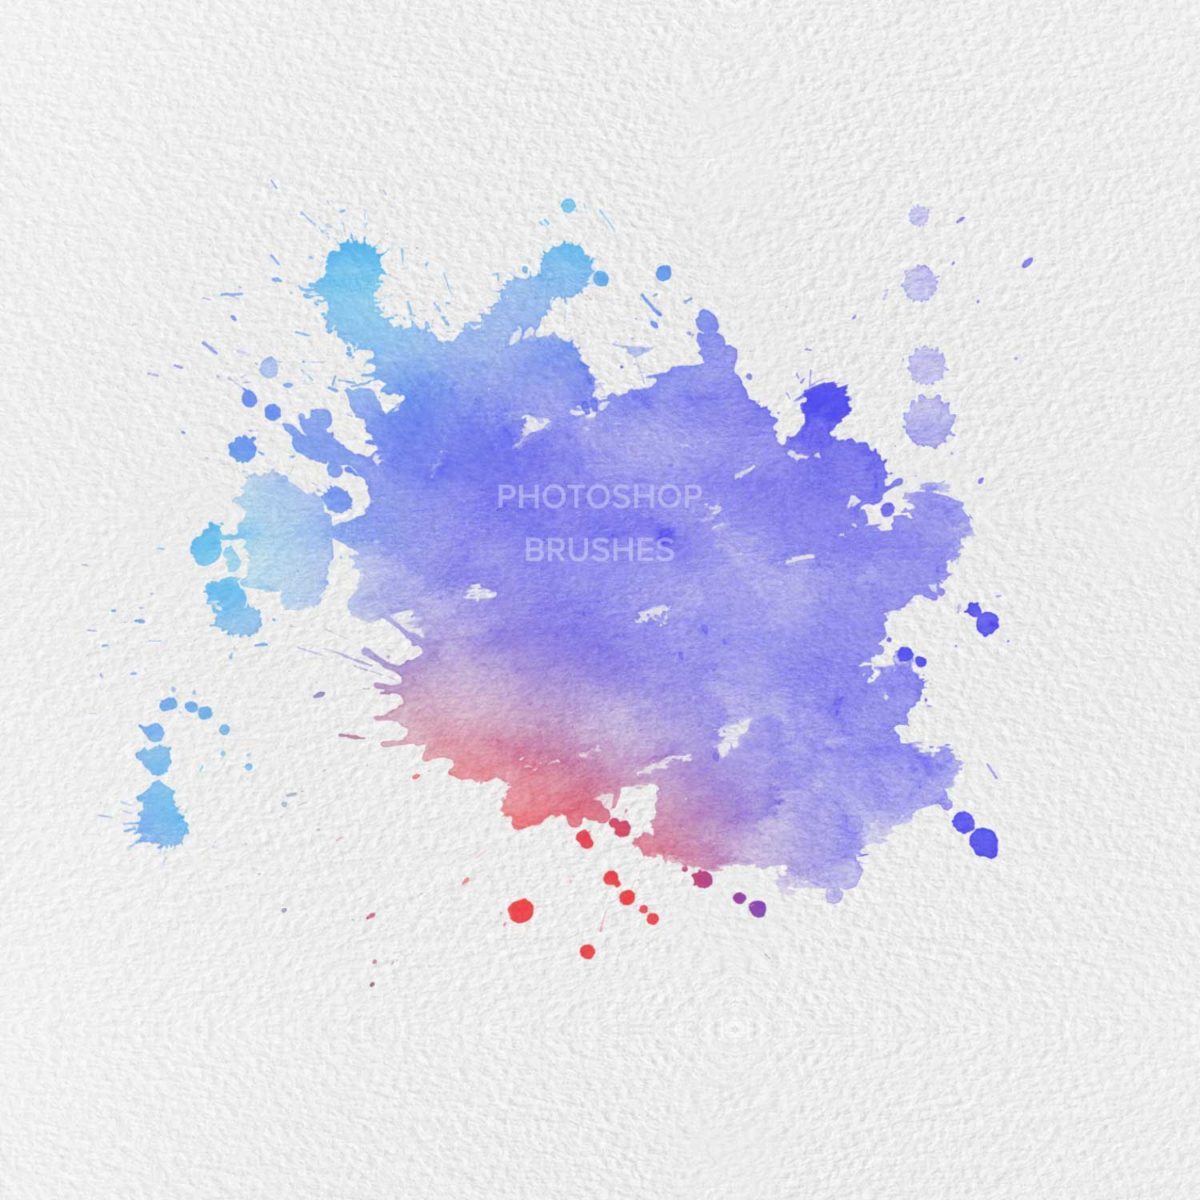 download brush photoshop watercolor